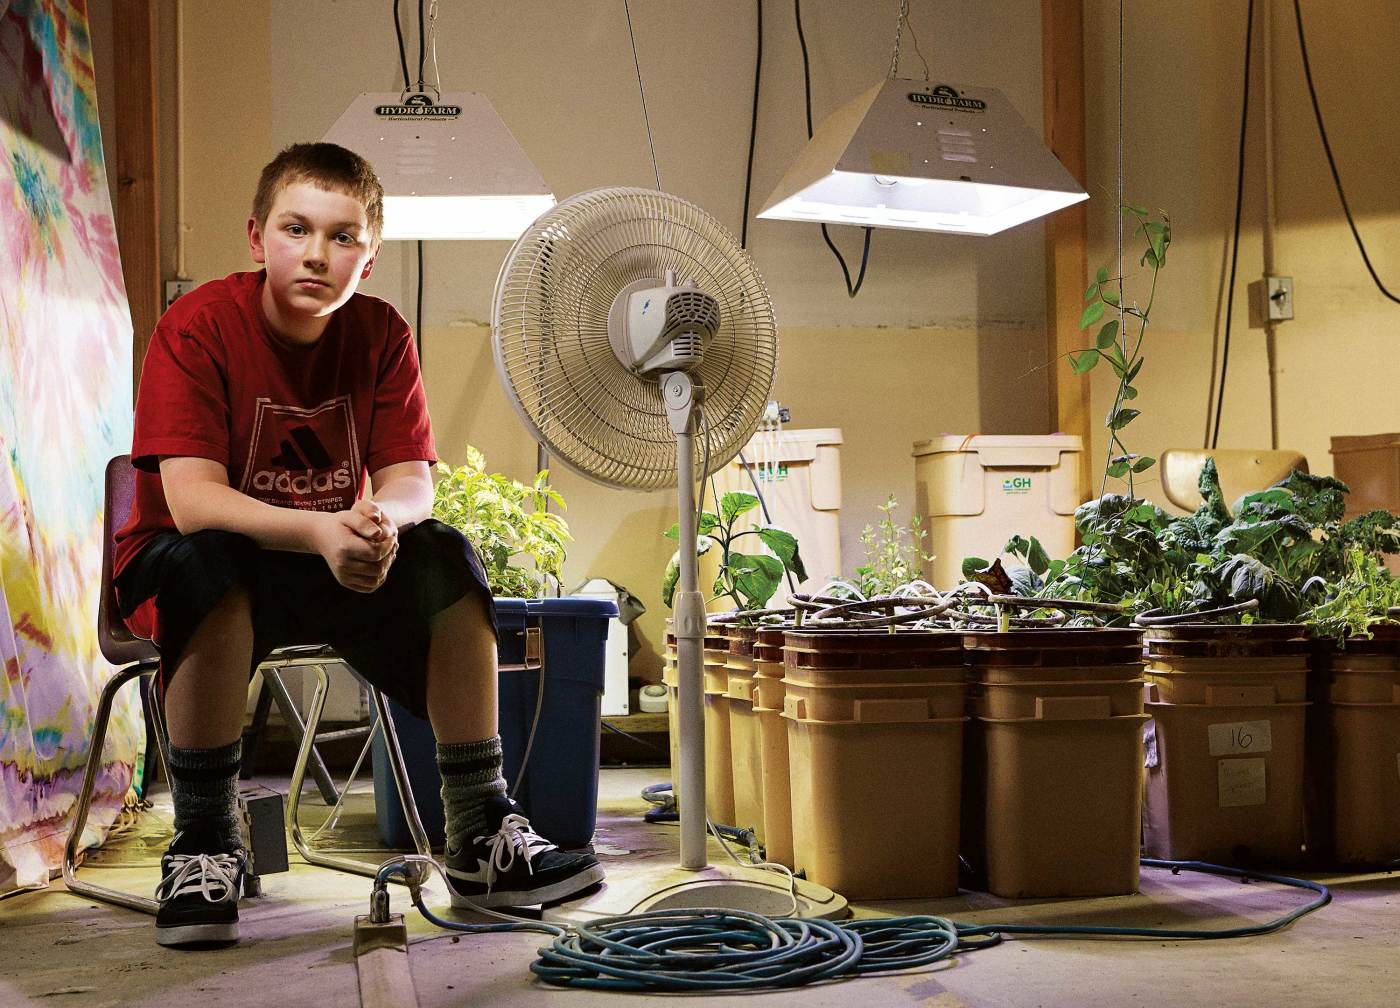 A pot bust on the tenth floor led to the police donating hydroponic equipment to Whittier’s school for a vegetable garden, which Joey Lipscomb oversaw through eighth grade.